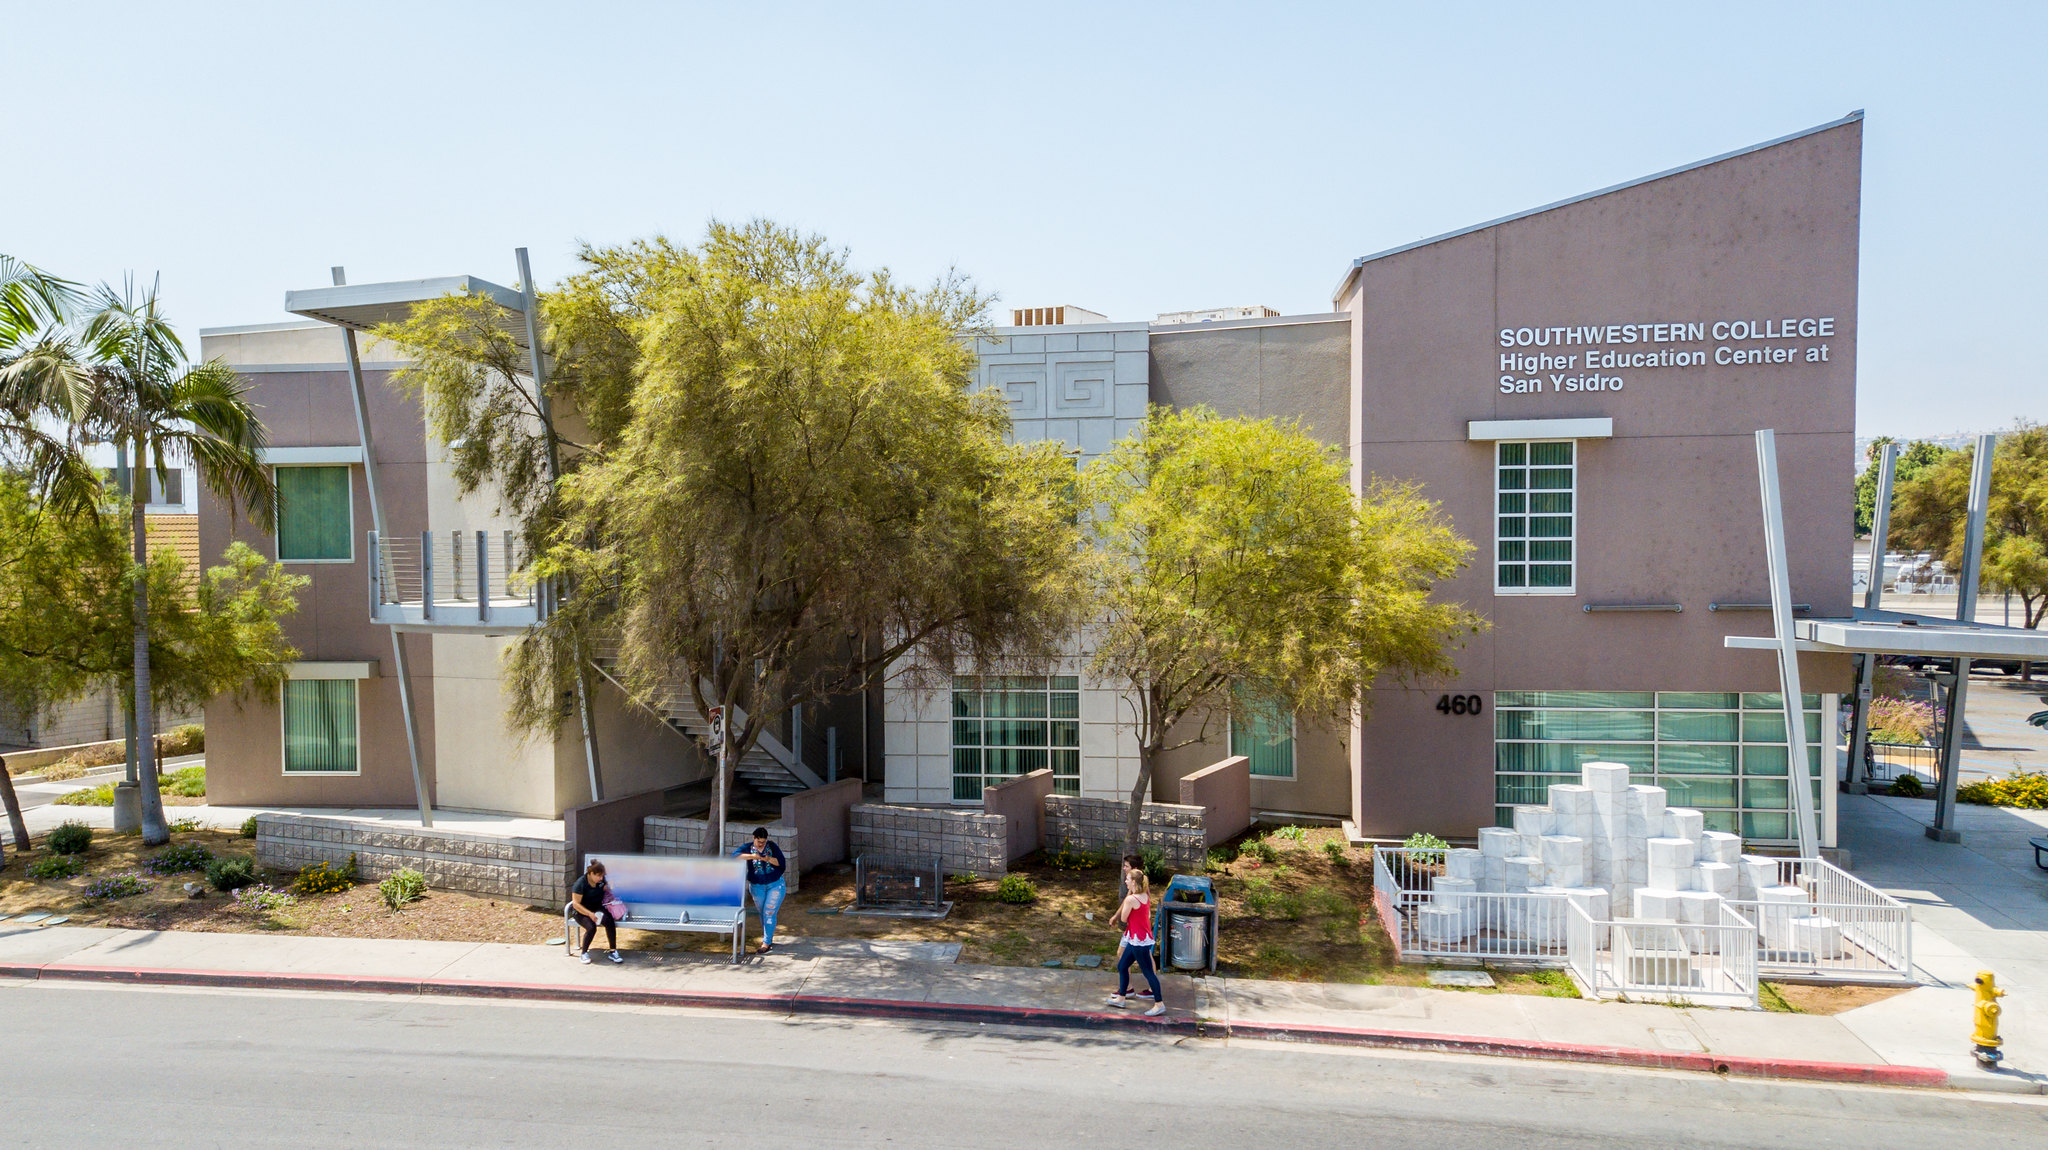 Southwestern College's Higher Education Center at San Ysidro. 